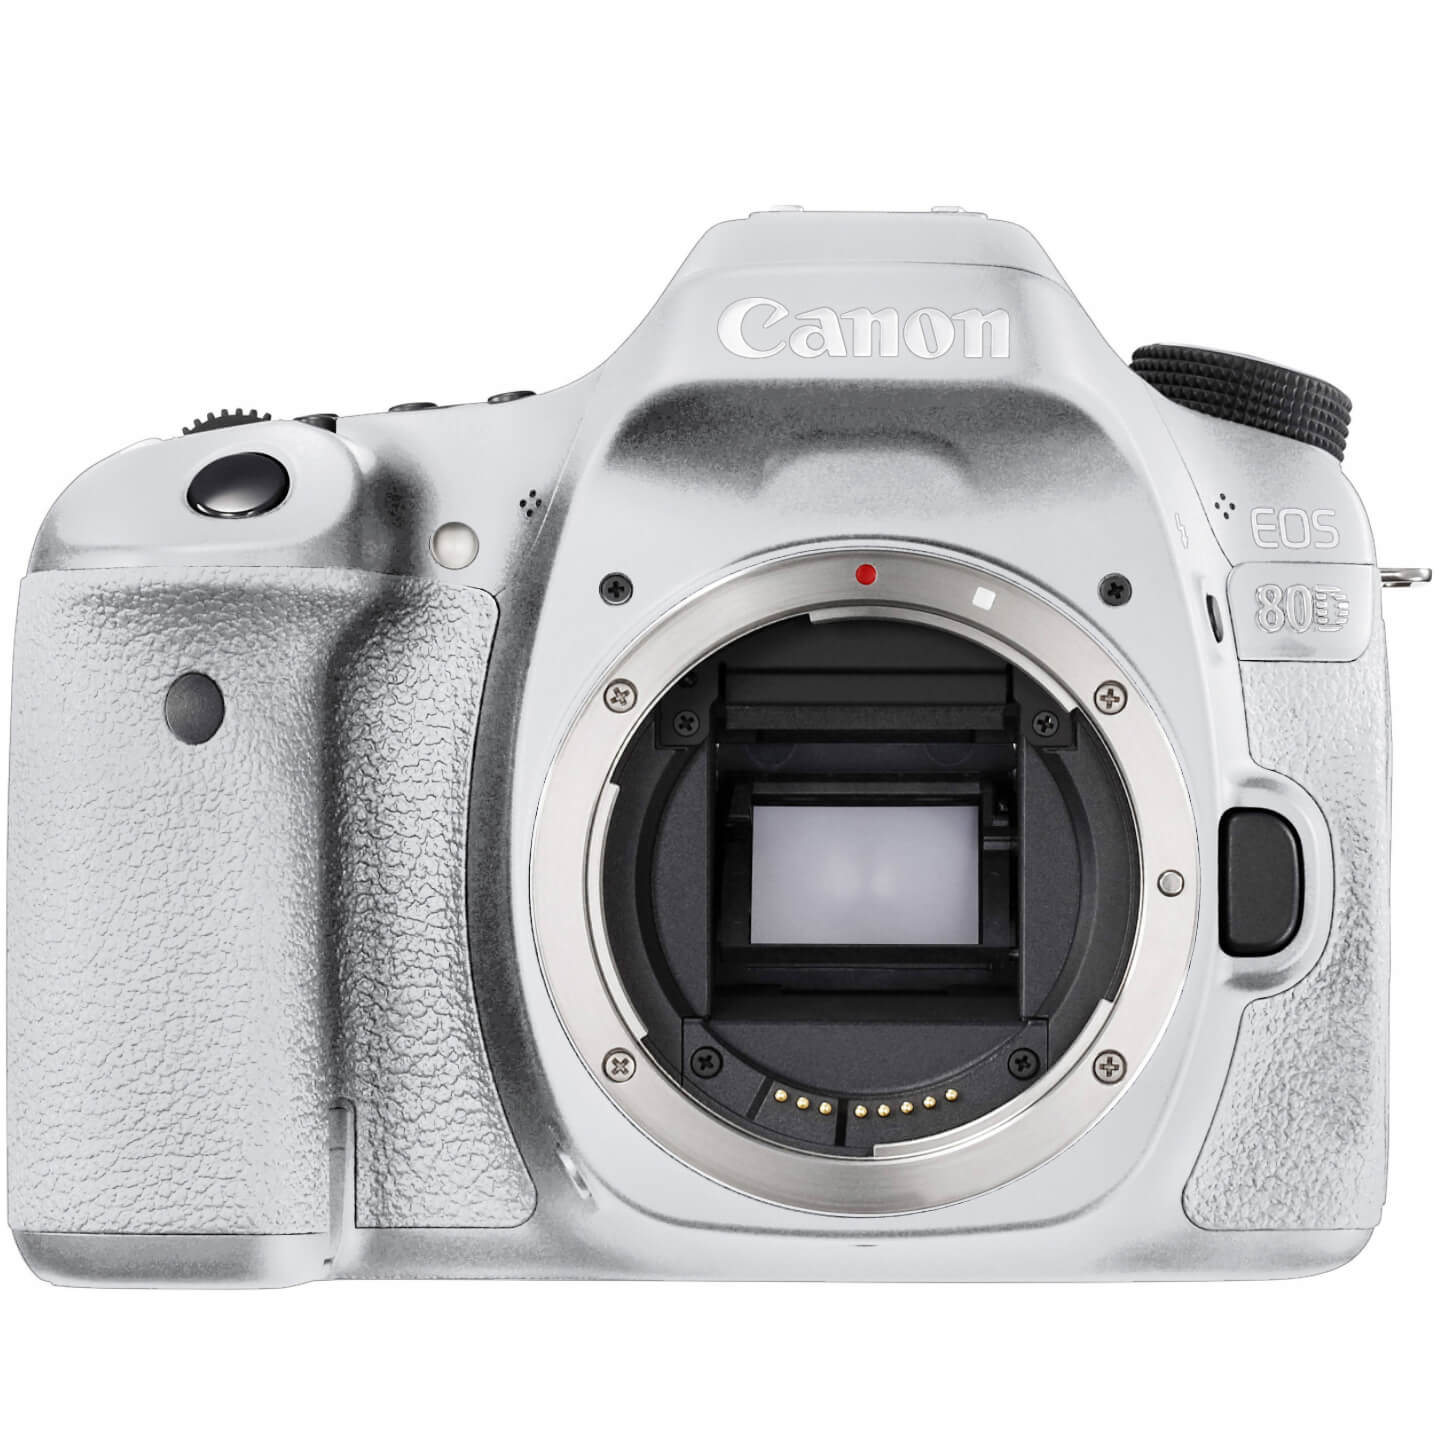 Stap Superioriteit Snor Canon EOS 80D Skins – CAMSKNS